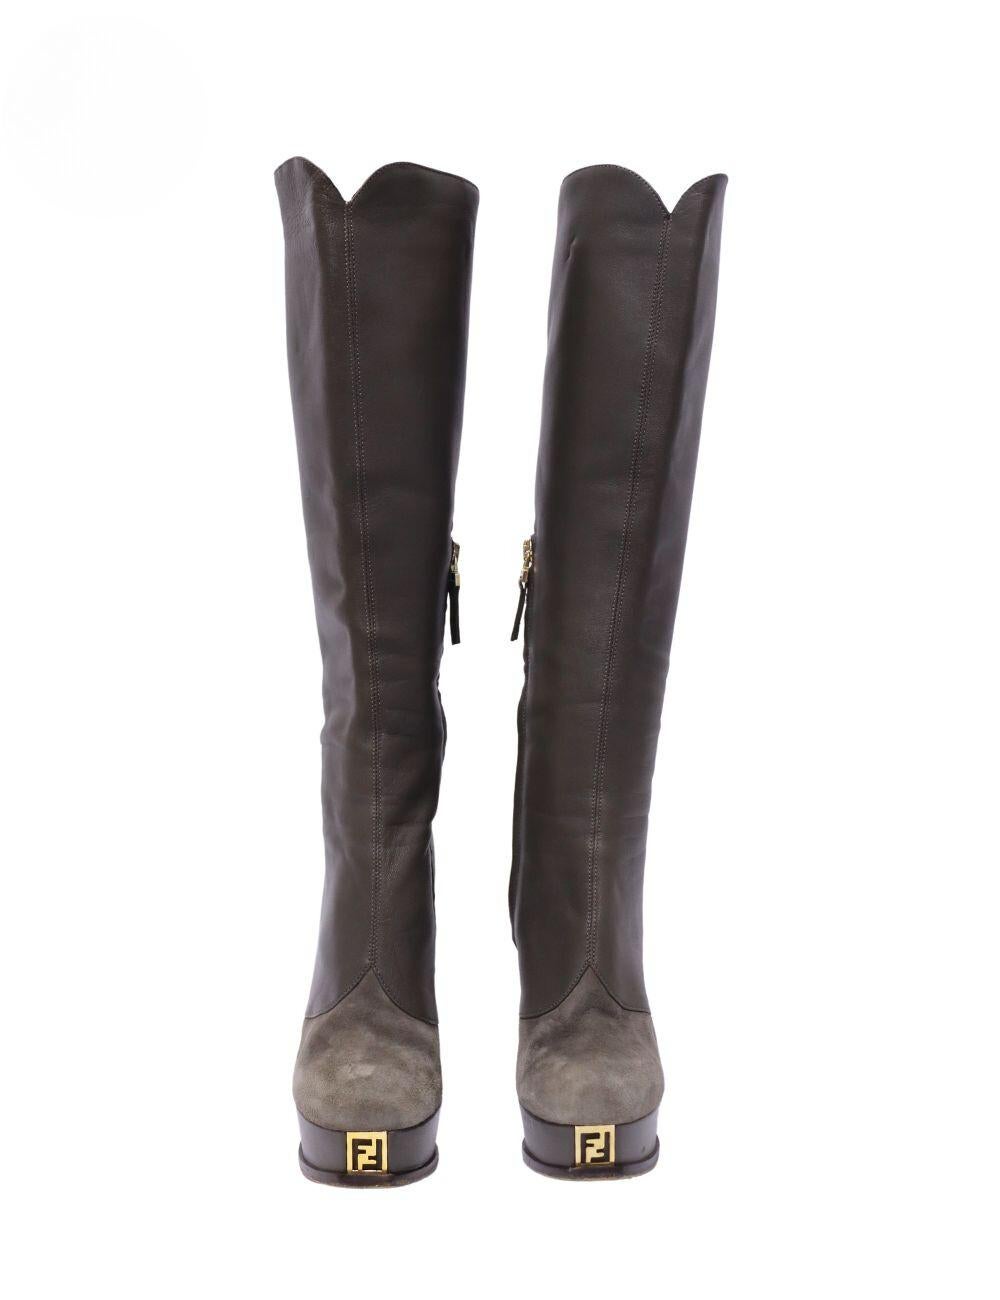 Fendi Leather Knee Length Boots , Features a Semi Round-toe, Platform and an FF Logo Plaque. 

Material: Leather and Suede
Size: EU 36
Heel Height: 13.5cm
Platform Height: 3cm
Overall Condition: Good
Interior Condition: Signs of use
Exterior